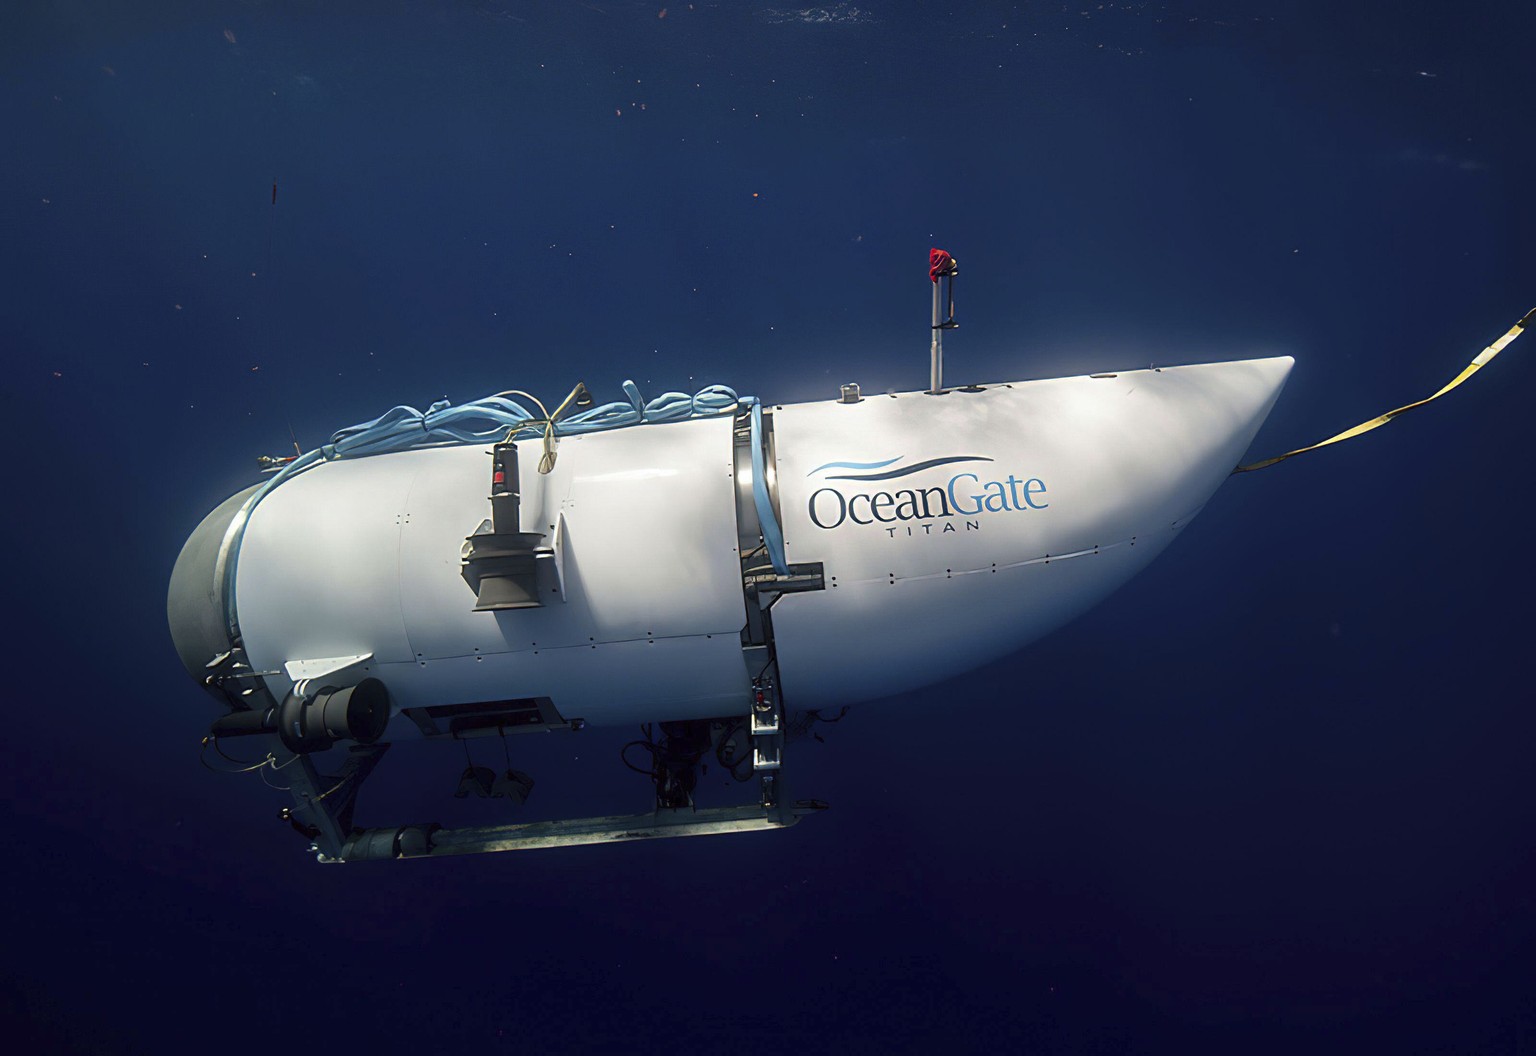 FILE - This photo provided by OceanGate Expeditions shows a submersible vessel named Titan used to visit the wreckage site of the Titanic. The wrecks of the Titanic and the Titan sit on the ocean floo ...